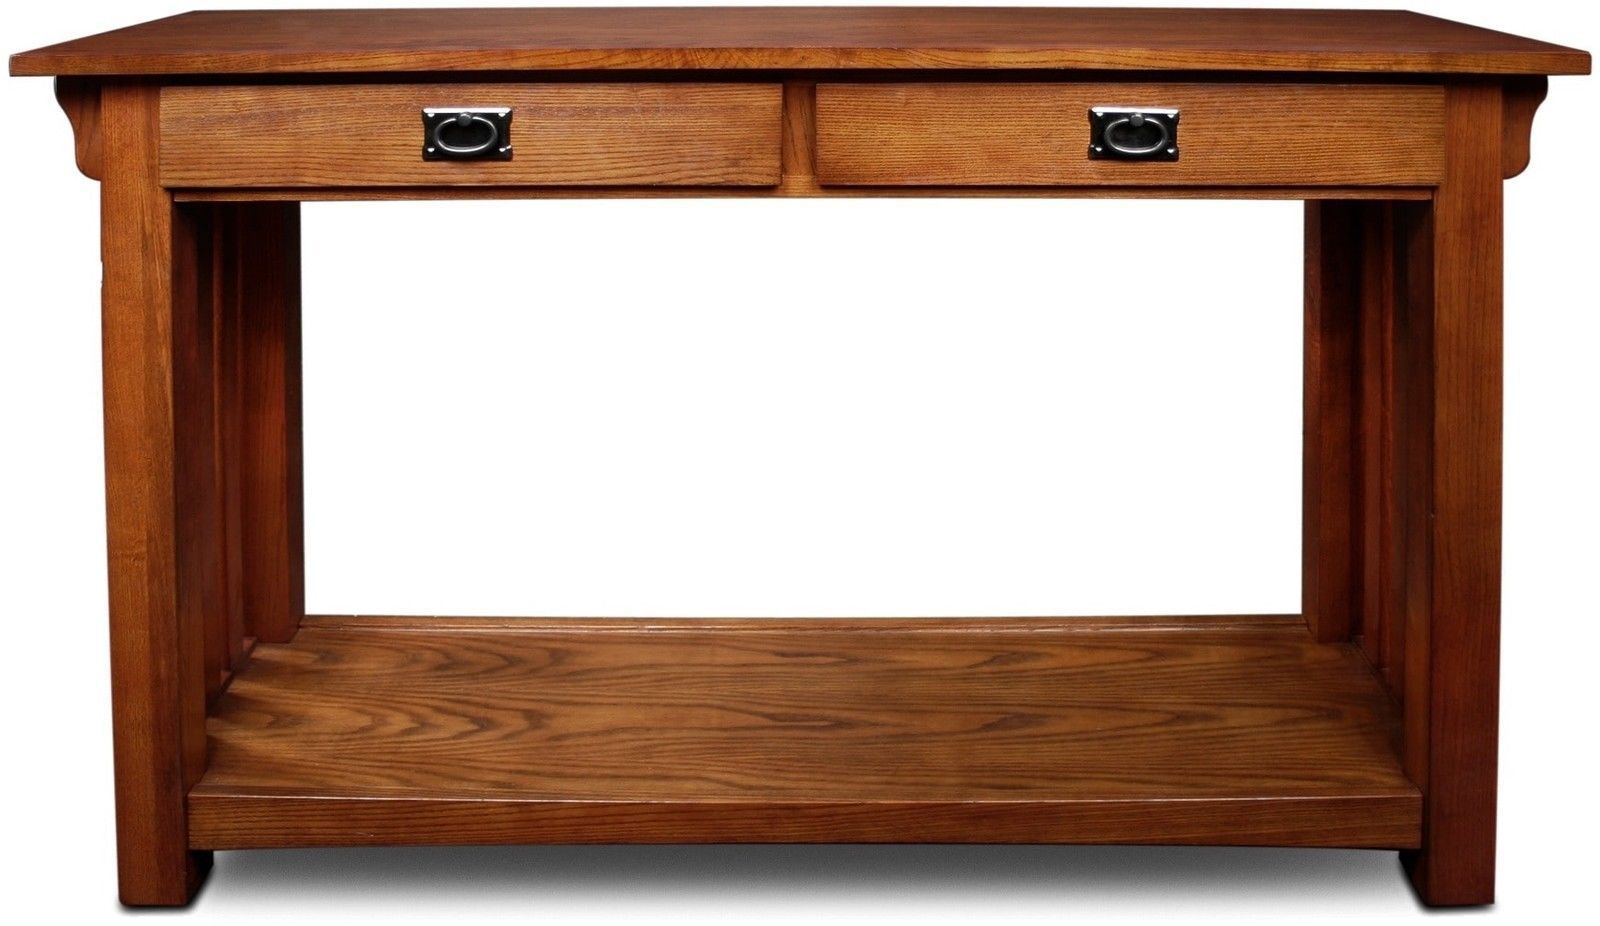 Mission Sofa Table Solid Wood Ash Oak Veneer Drawer Console Furniture Inside Wood Veneer Console Tables (View 19 of 20)